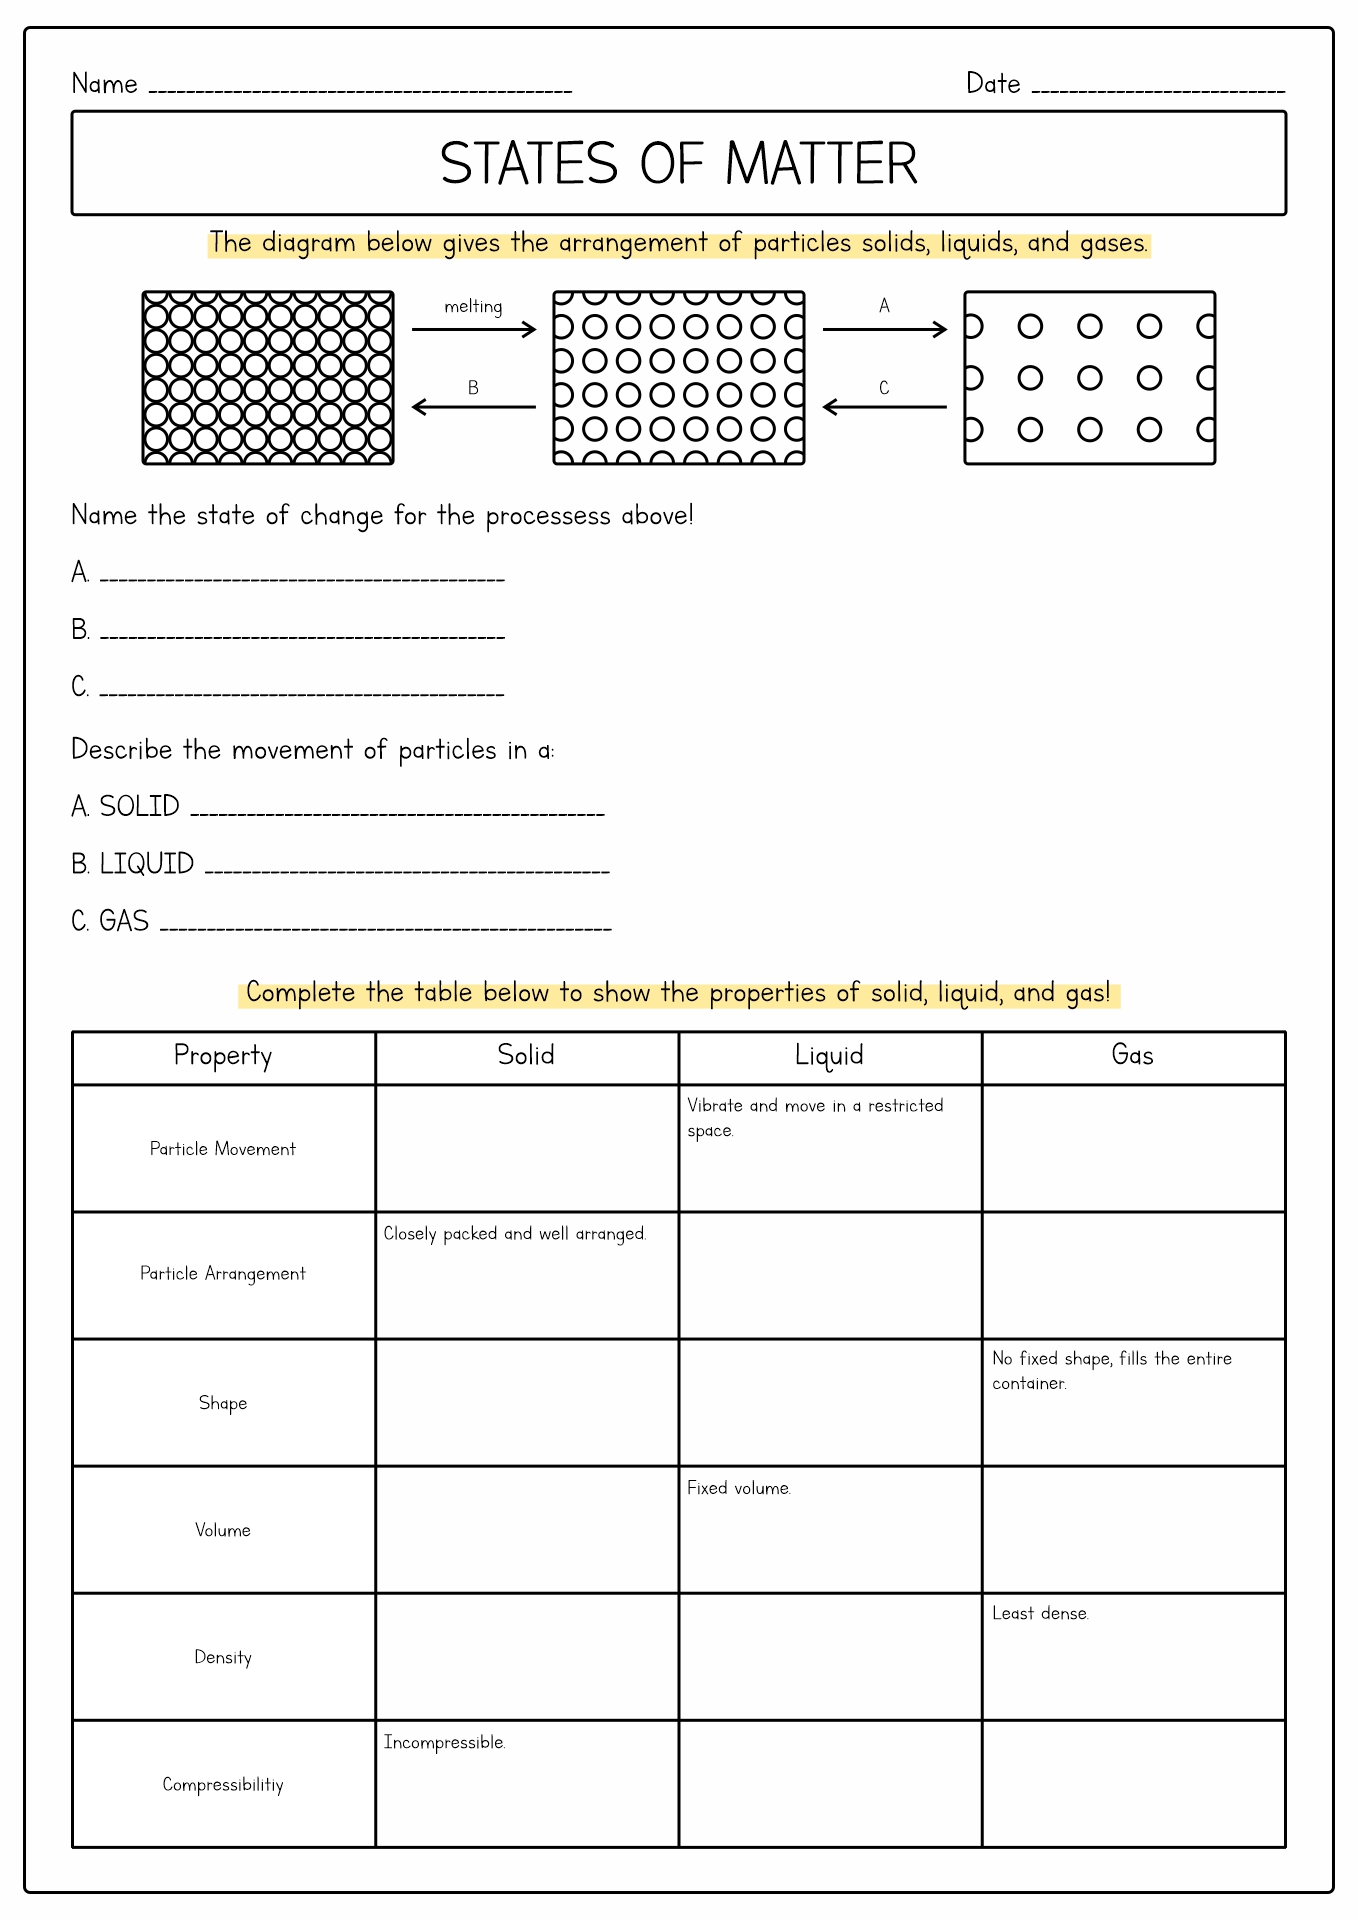 States of Matter Worksheets Middle School